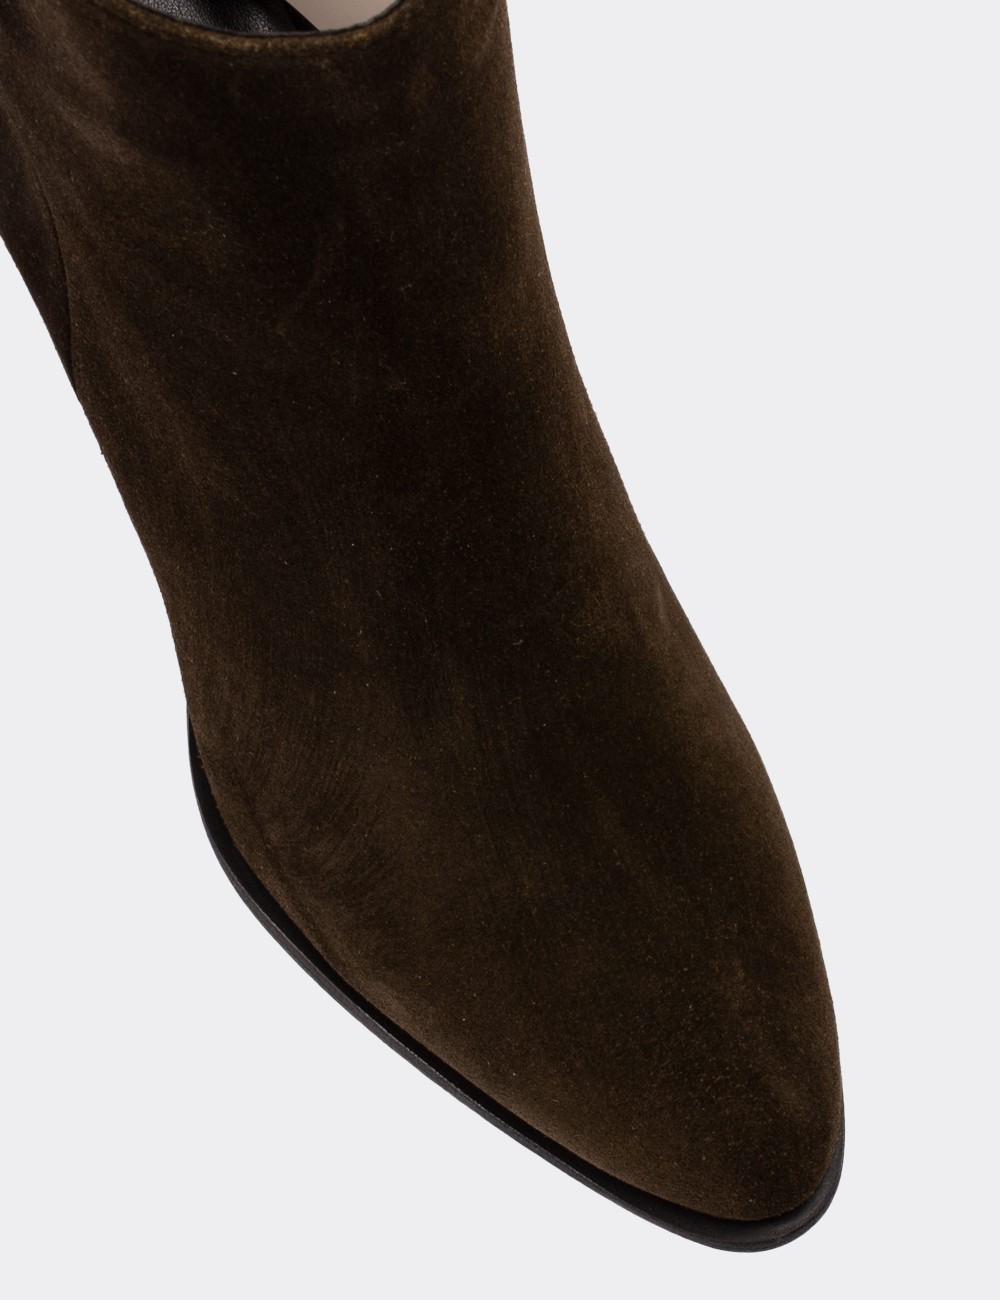 Brown Suede Leather Boots - E4452ZHAKC01